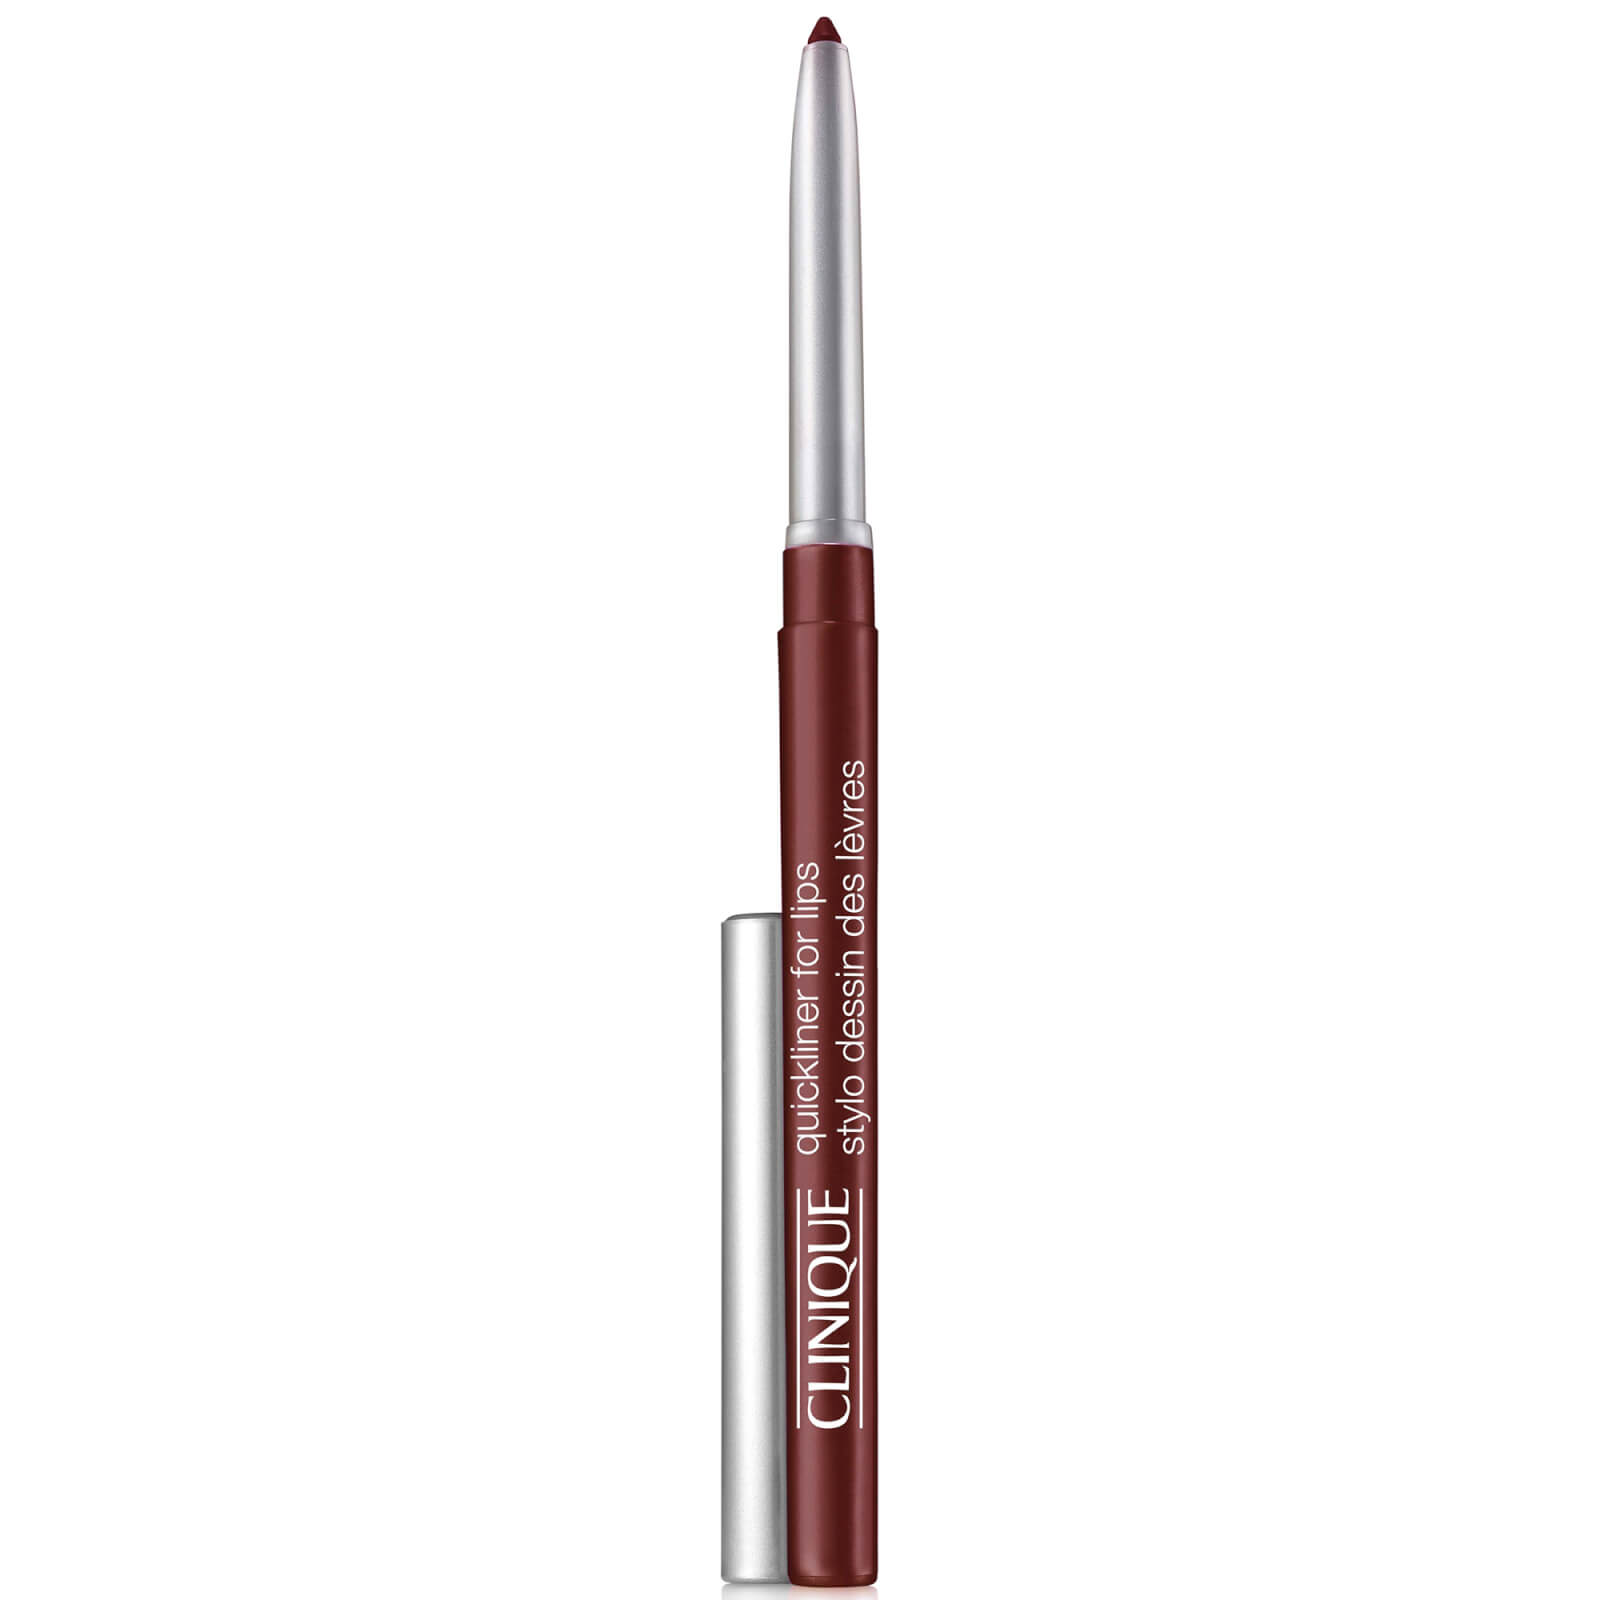 Clinique Quickliner for Lips 0.3g (Various Shades) - Chocolate Chip